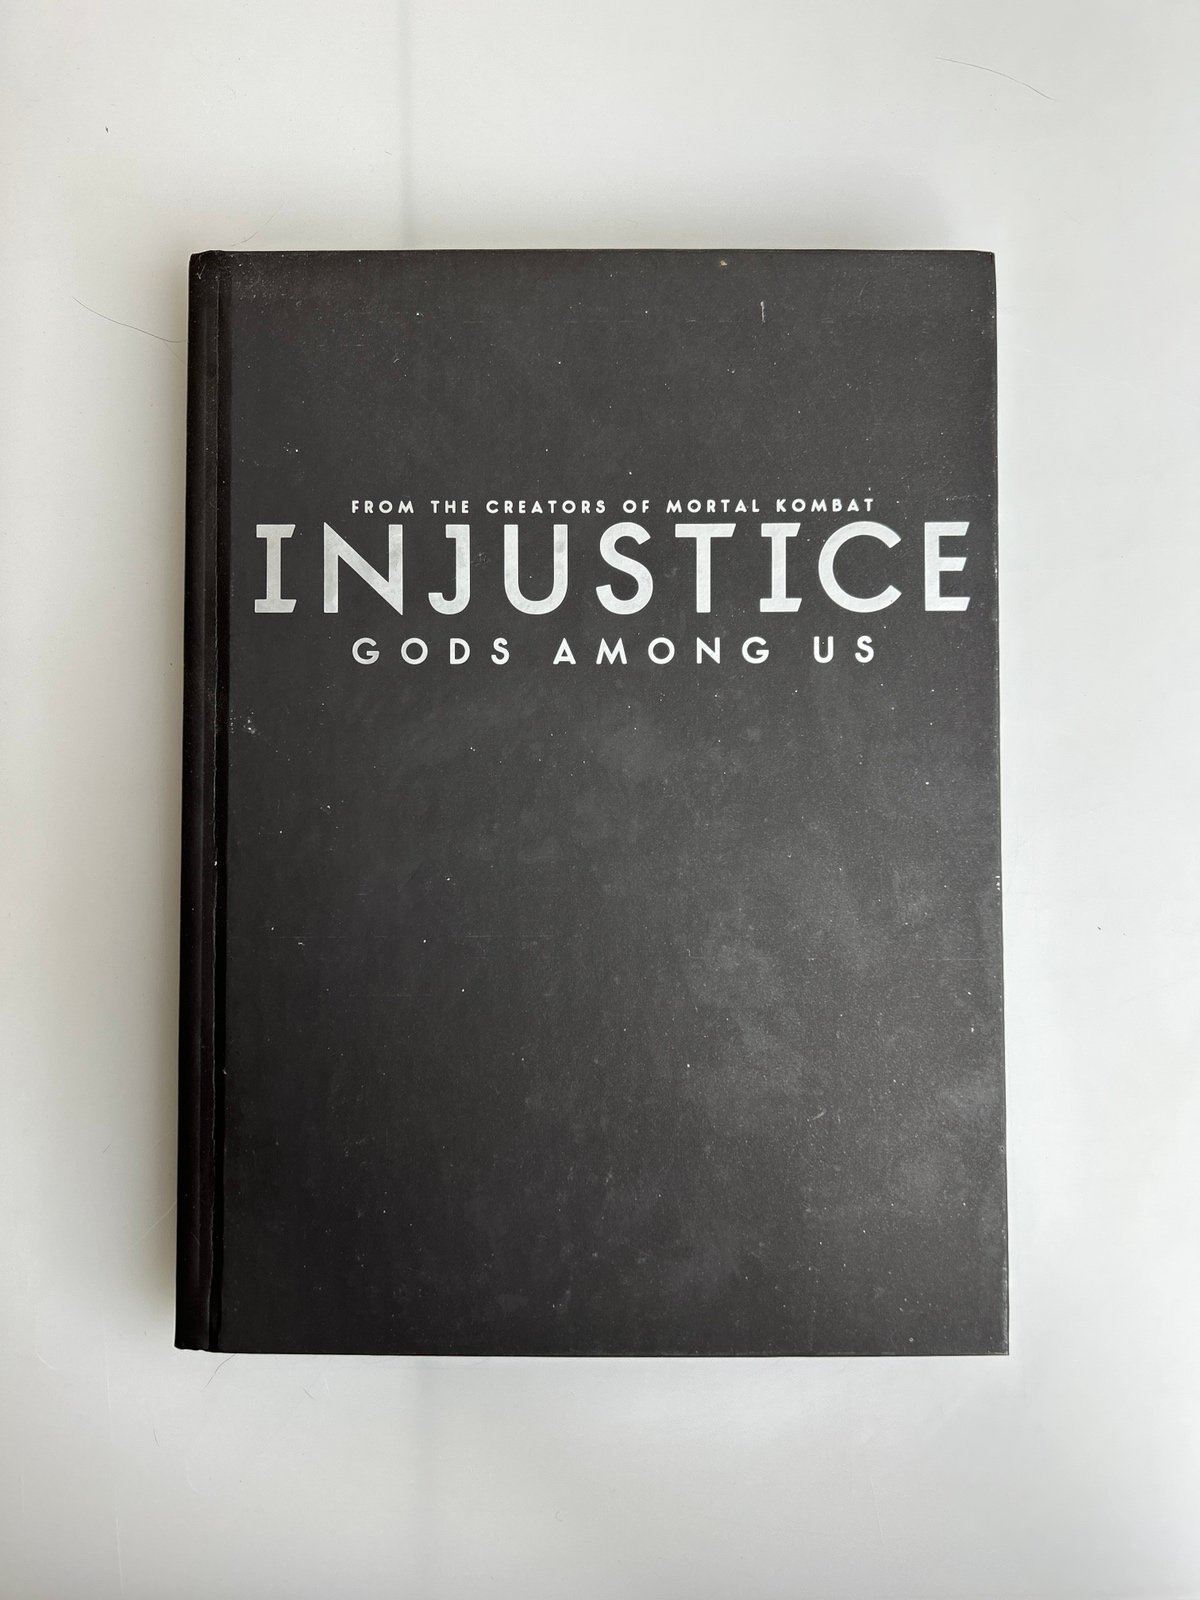 Injustice Gods Among Us Game Guide Hardcover G91mvq9QM